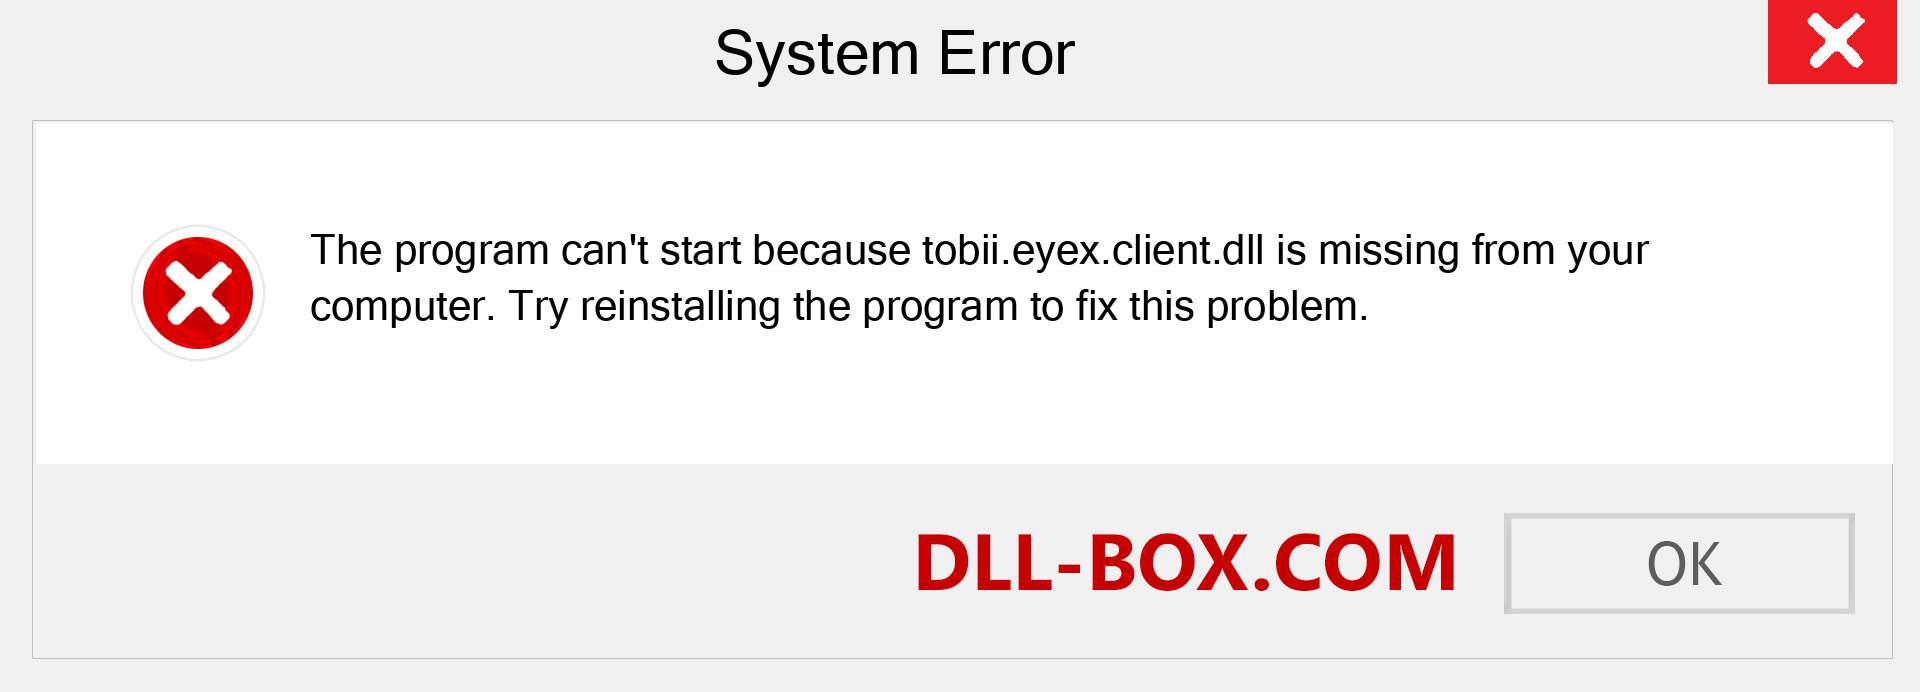  tobii.eyex.client.dll file is missing?. Download for Windows 7, 8, 10 - Fix  tobii.eyex.client dll Missing Error on Windows, photos, images